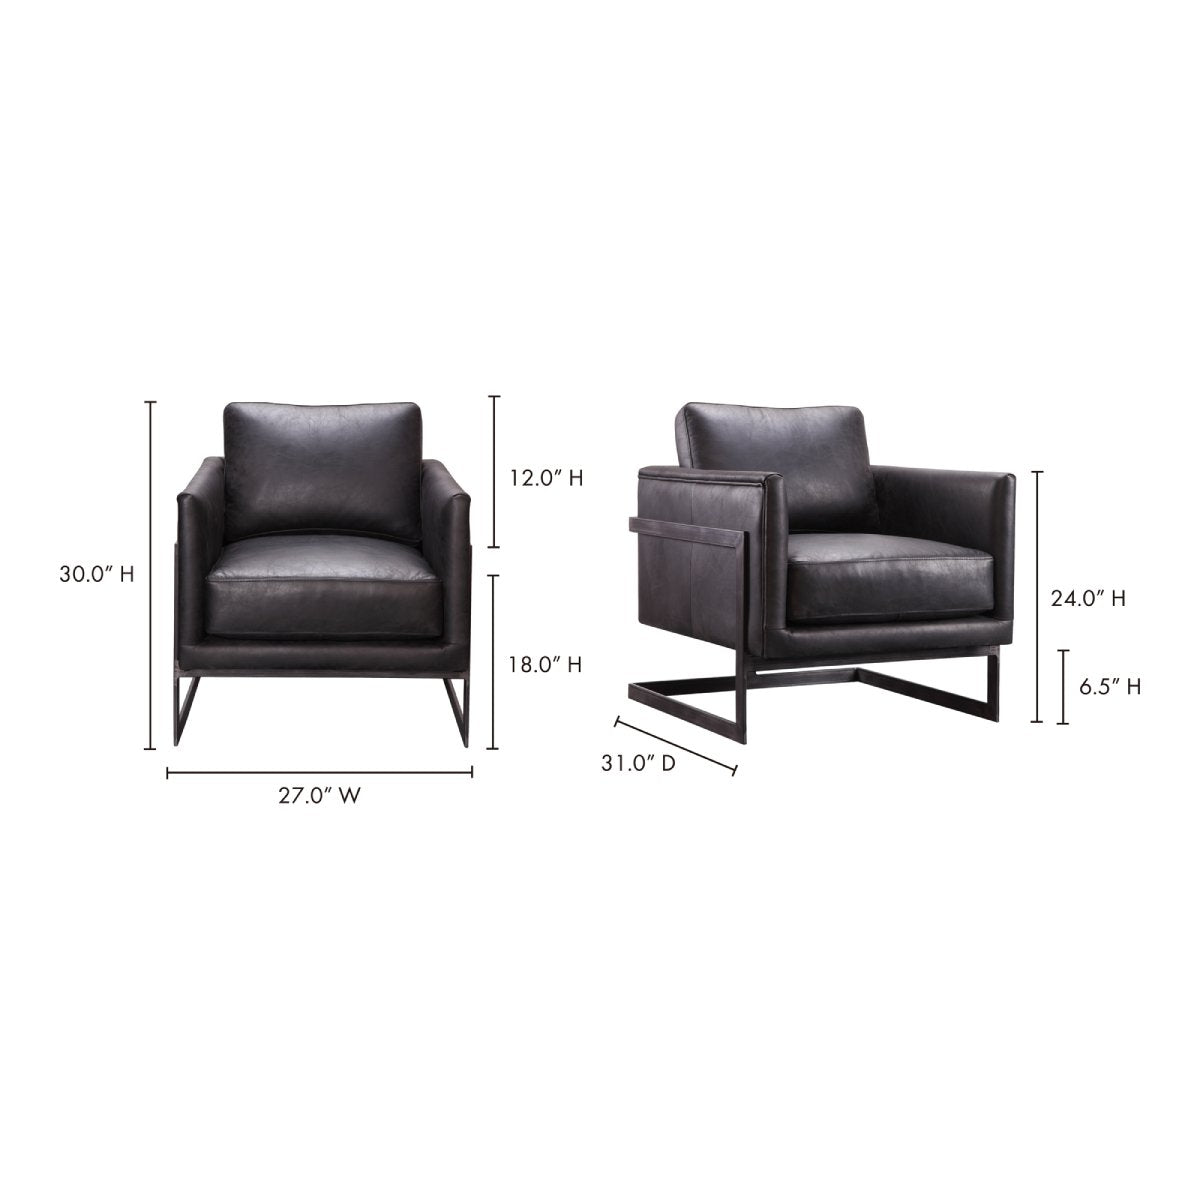 Load image into Gallery viewer, Luxley Club Chair Occasional Chairs Moe&amp;#39;s     Four Hands, Burke Decor, Mid Century Modern Furniture, Old Bones Furniture Company, Old Bones Co, Modern Mid Century, Designer Furniture, https://www.oldbonesco.com/
